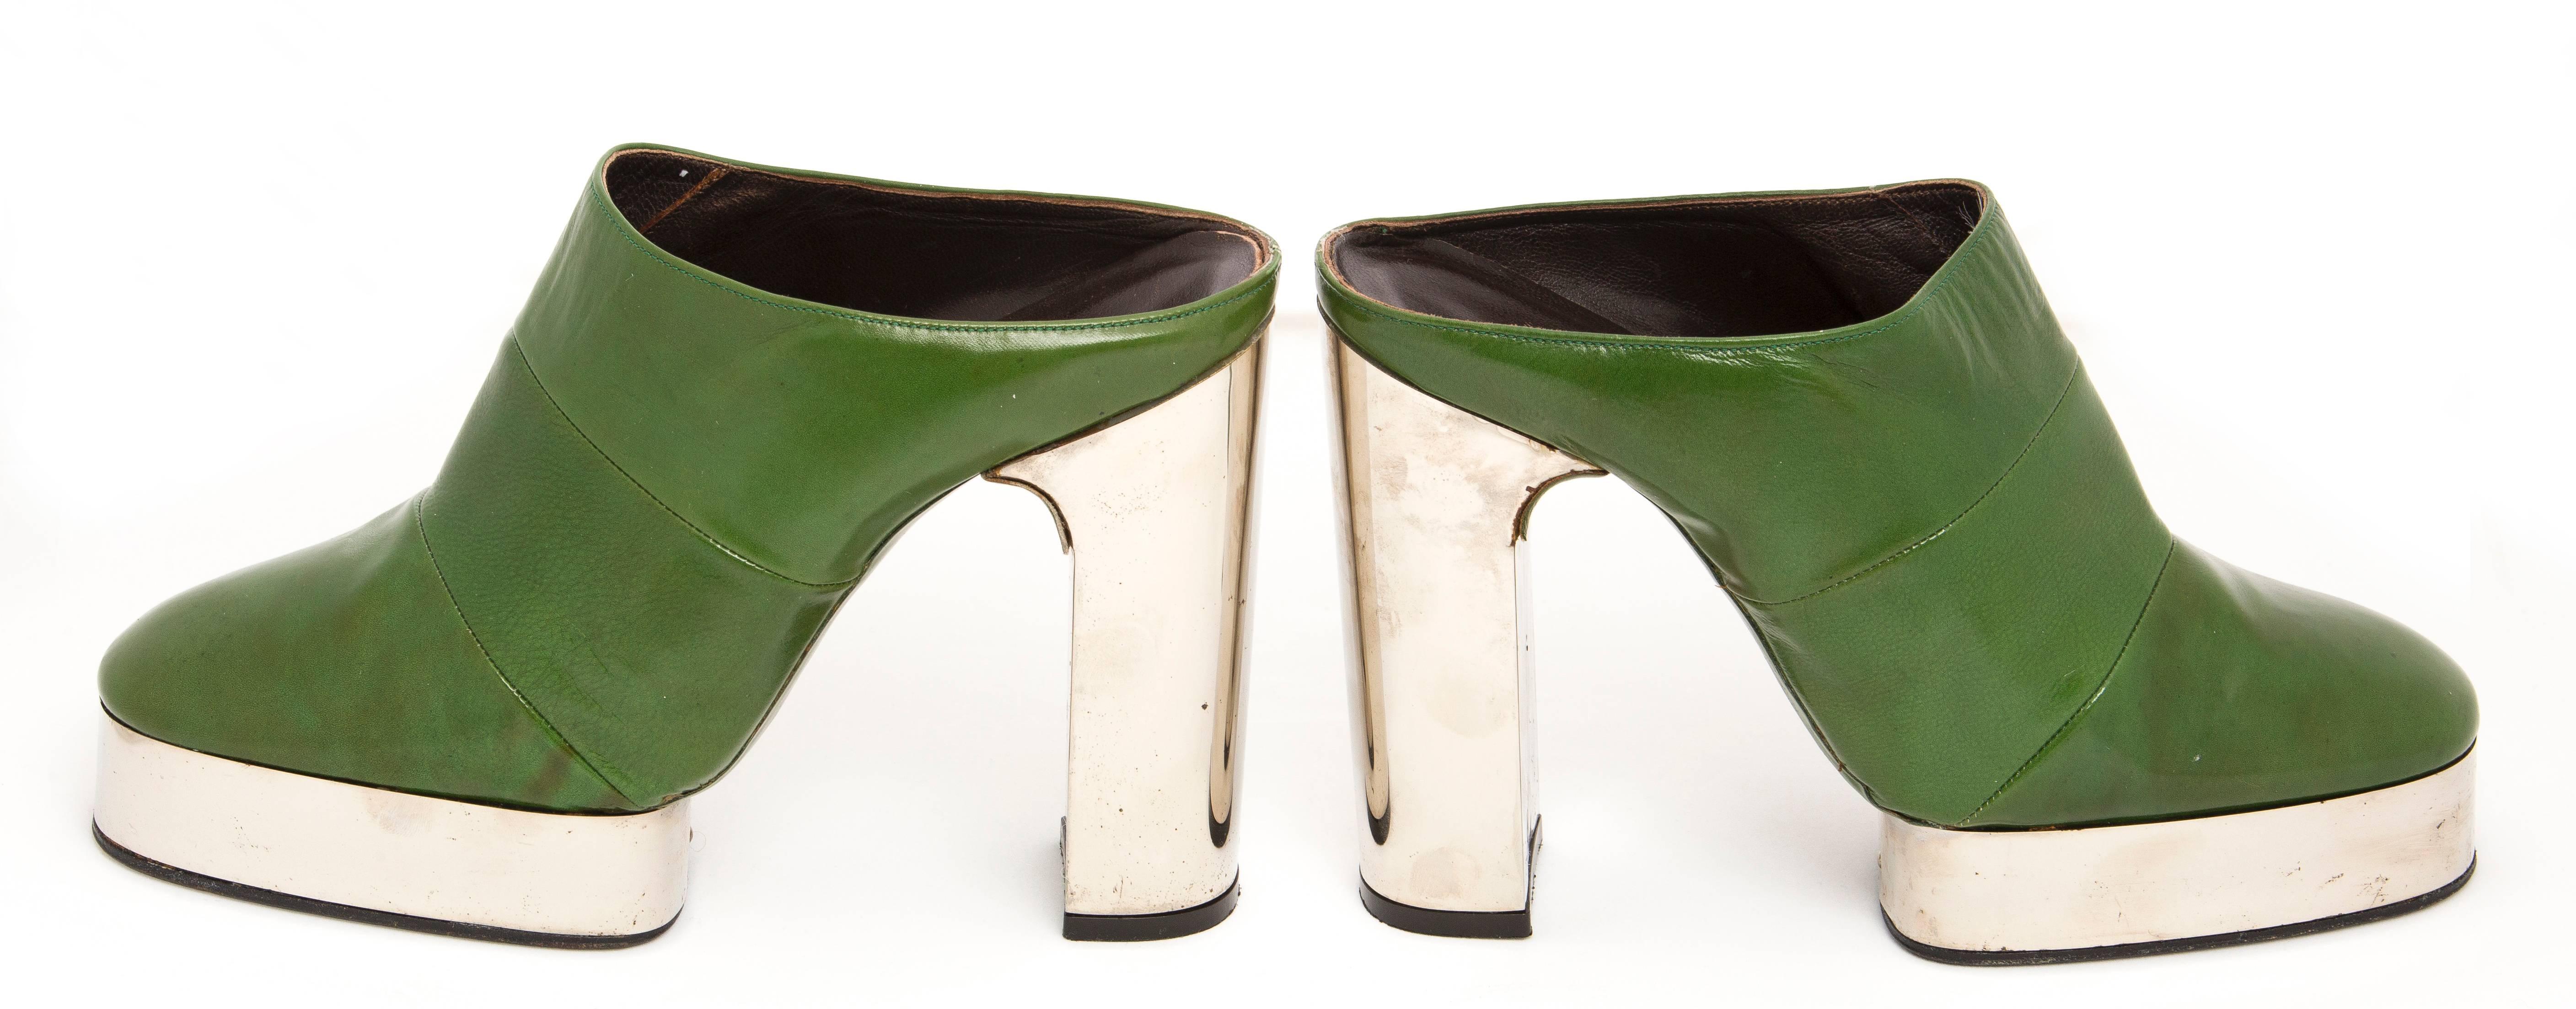 Bally by Pancaldi, circa 1970's apple green leather platform shoes.

Size: 7 1/2 US
Heel Height: 5 inches
Platform Height: 1 inches
Length: 9 1/2 inches
Width: 3 inches
